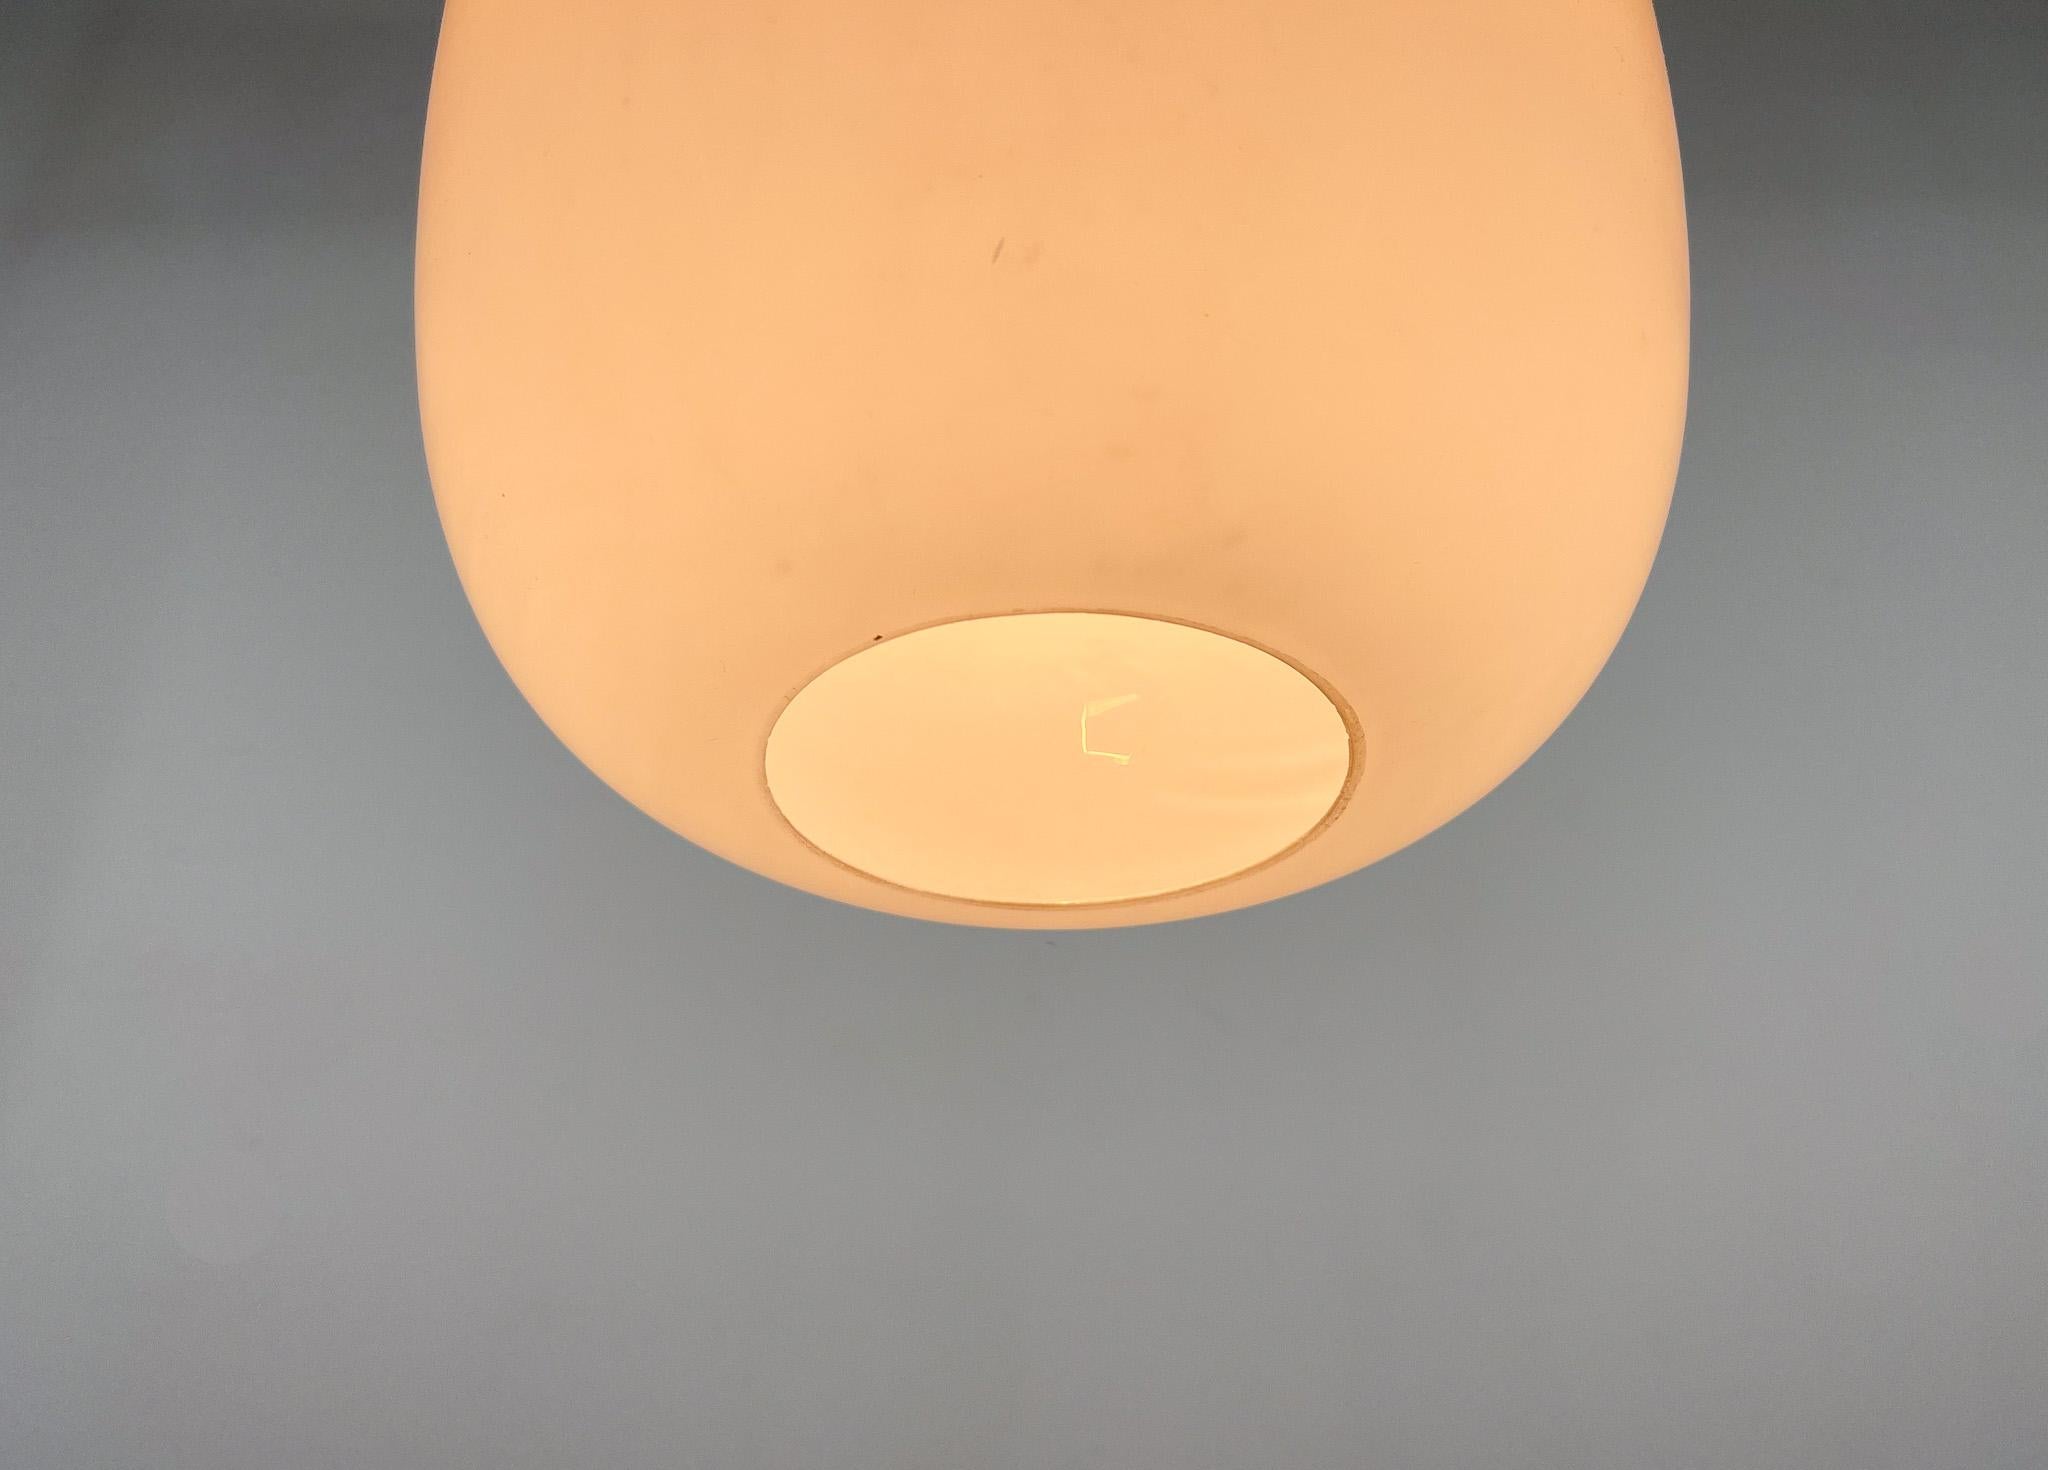 Opaline Glass 1960s Wood and Glass Pendant Light by ULUV, Czechoslovakia, Marked by Manufactur For Sale